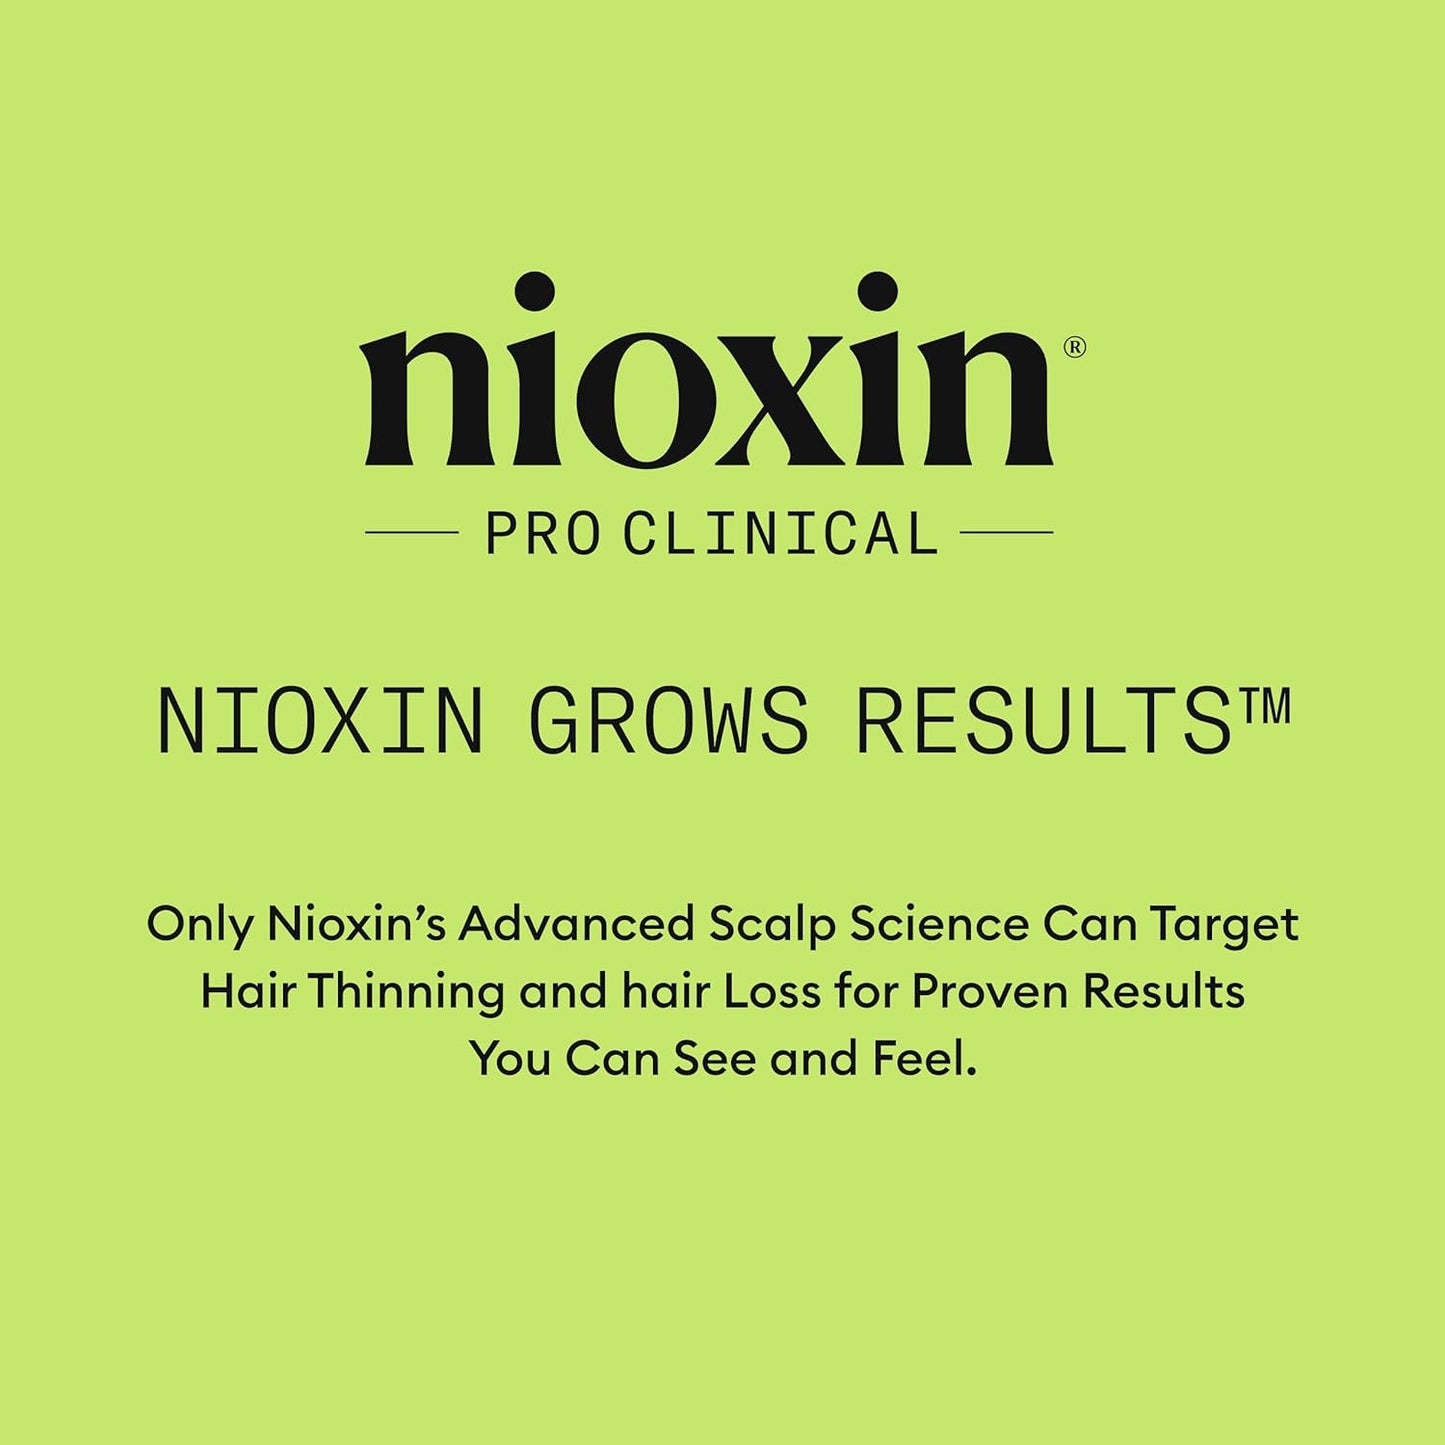 System Kits Hair Strengthening & Thickening Treatments | Treat & Hydrate Sensitive or Dry Scalp | For All Hair Thinning Types | NIOXIN - SH Salons